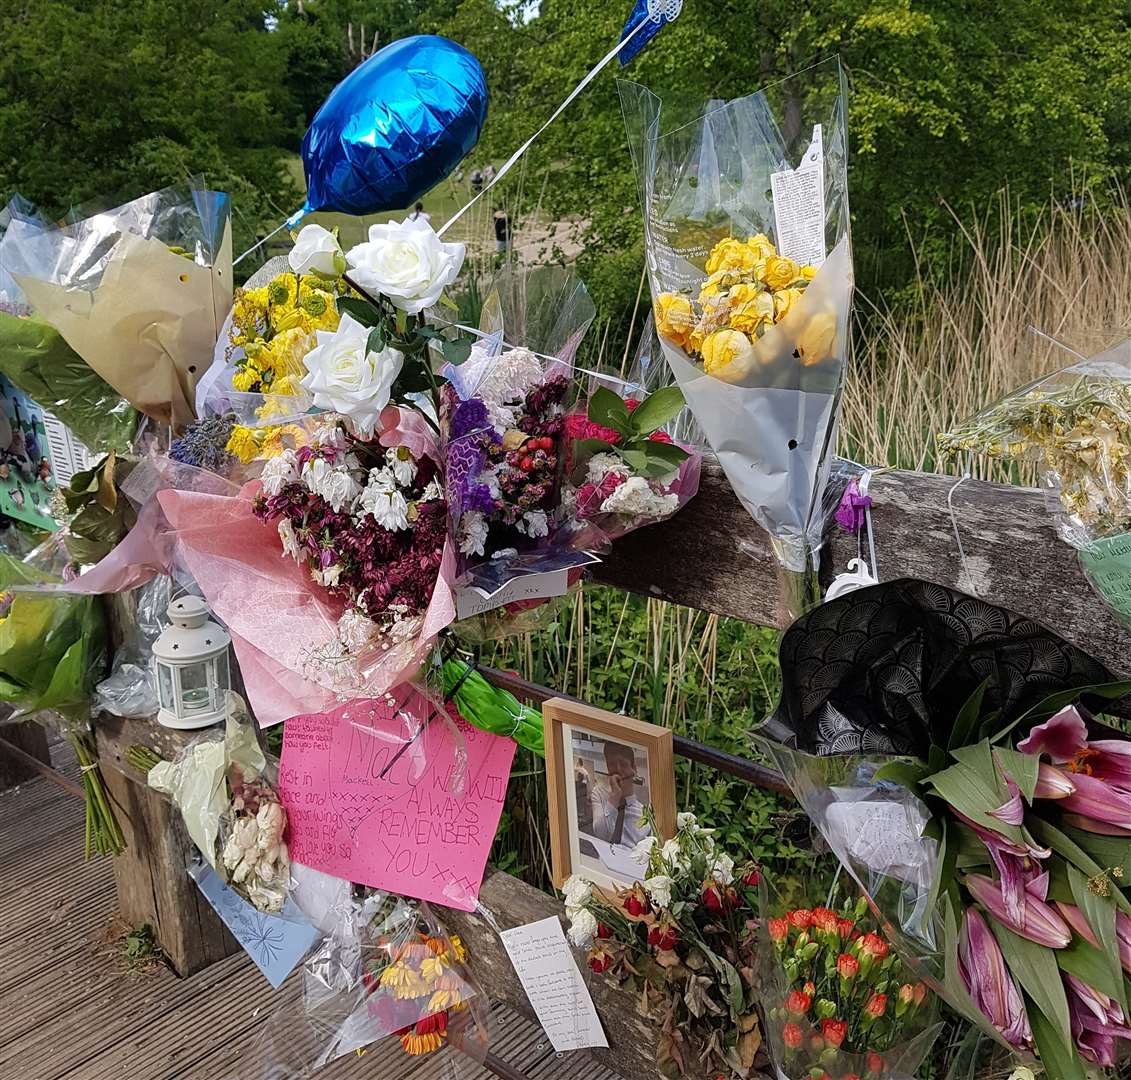 Floral tributes were left in Dunorlan Park